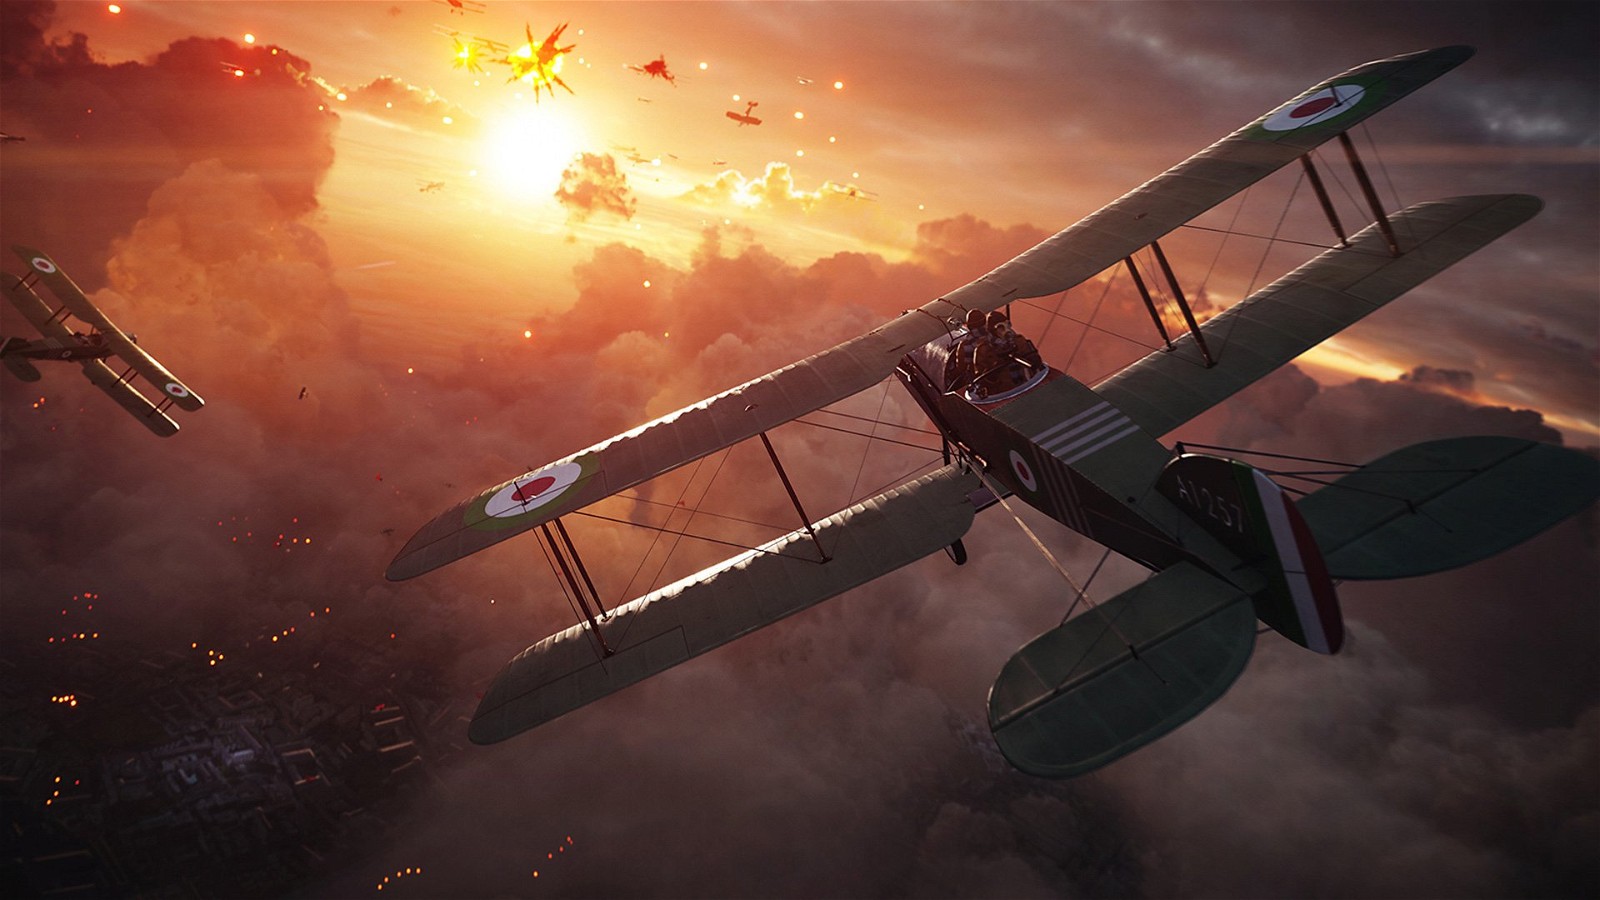 Battlefield 1 is divided into 6 chapters each portraying a different form of warfare.